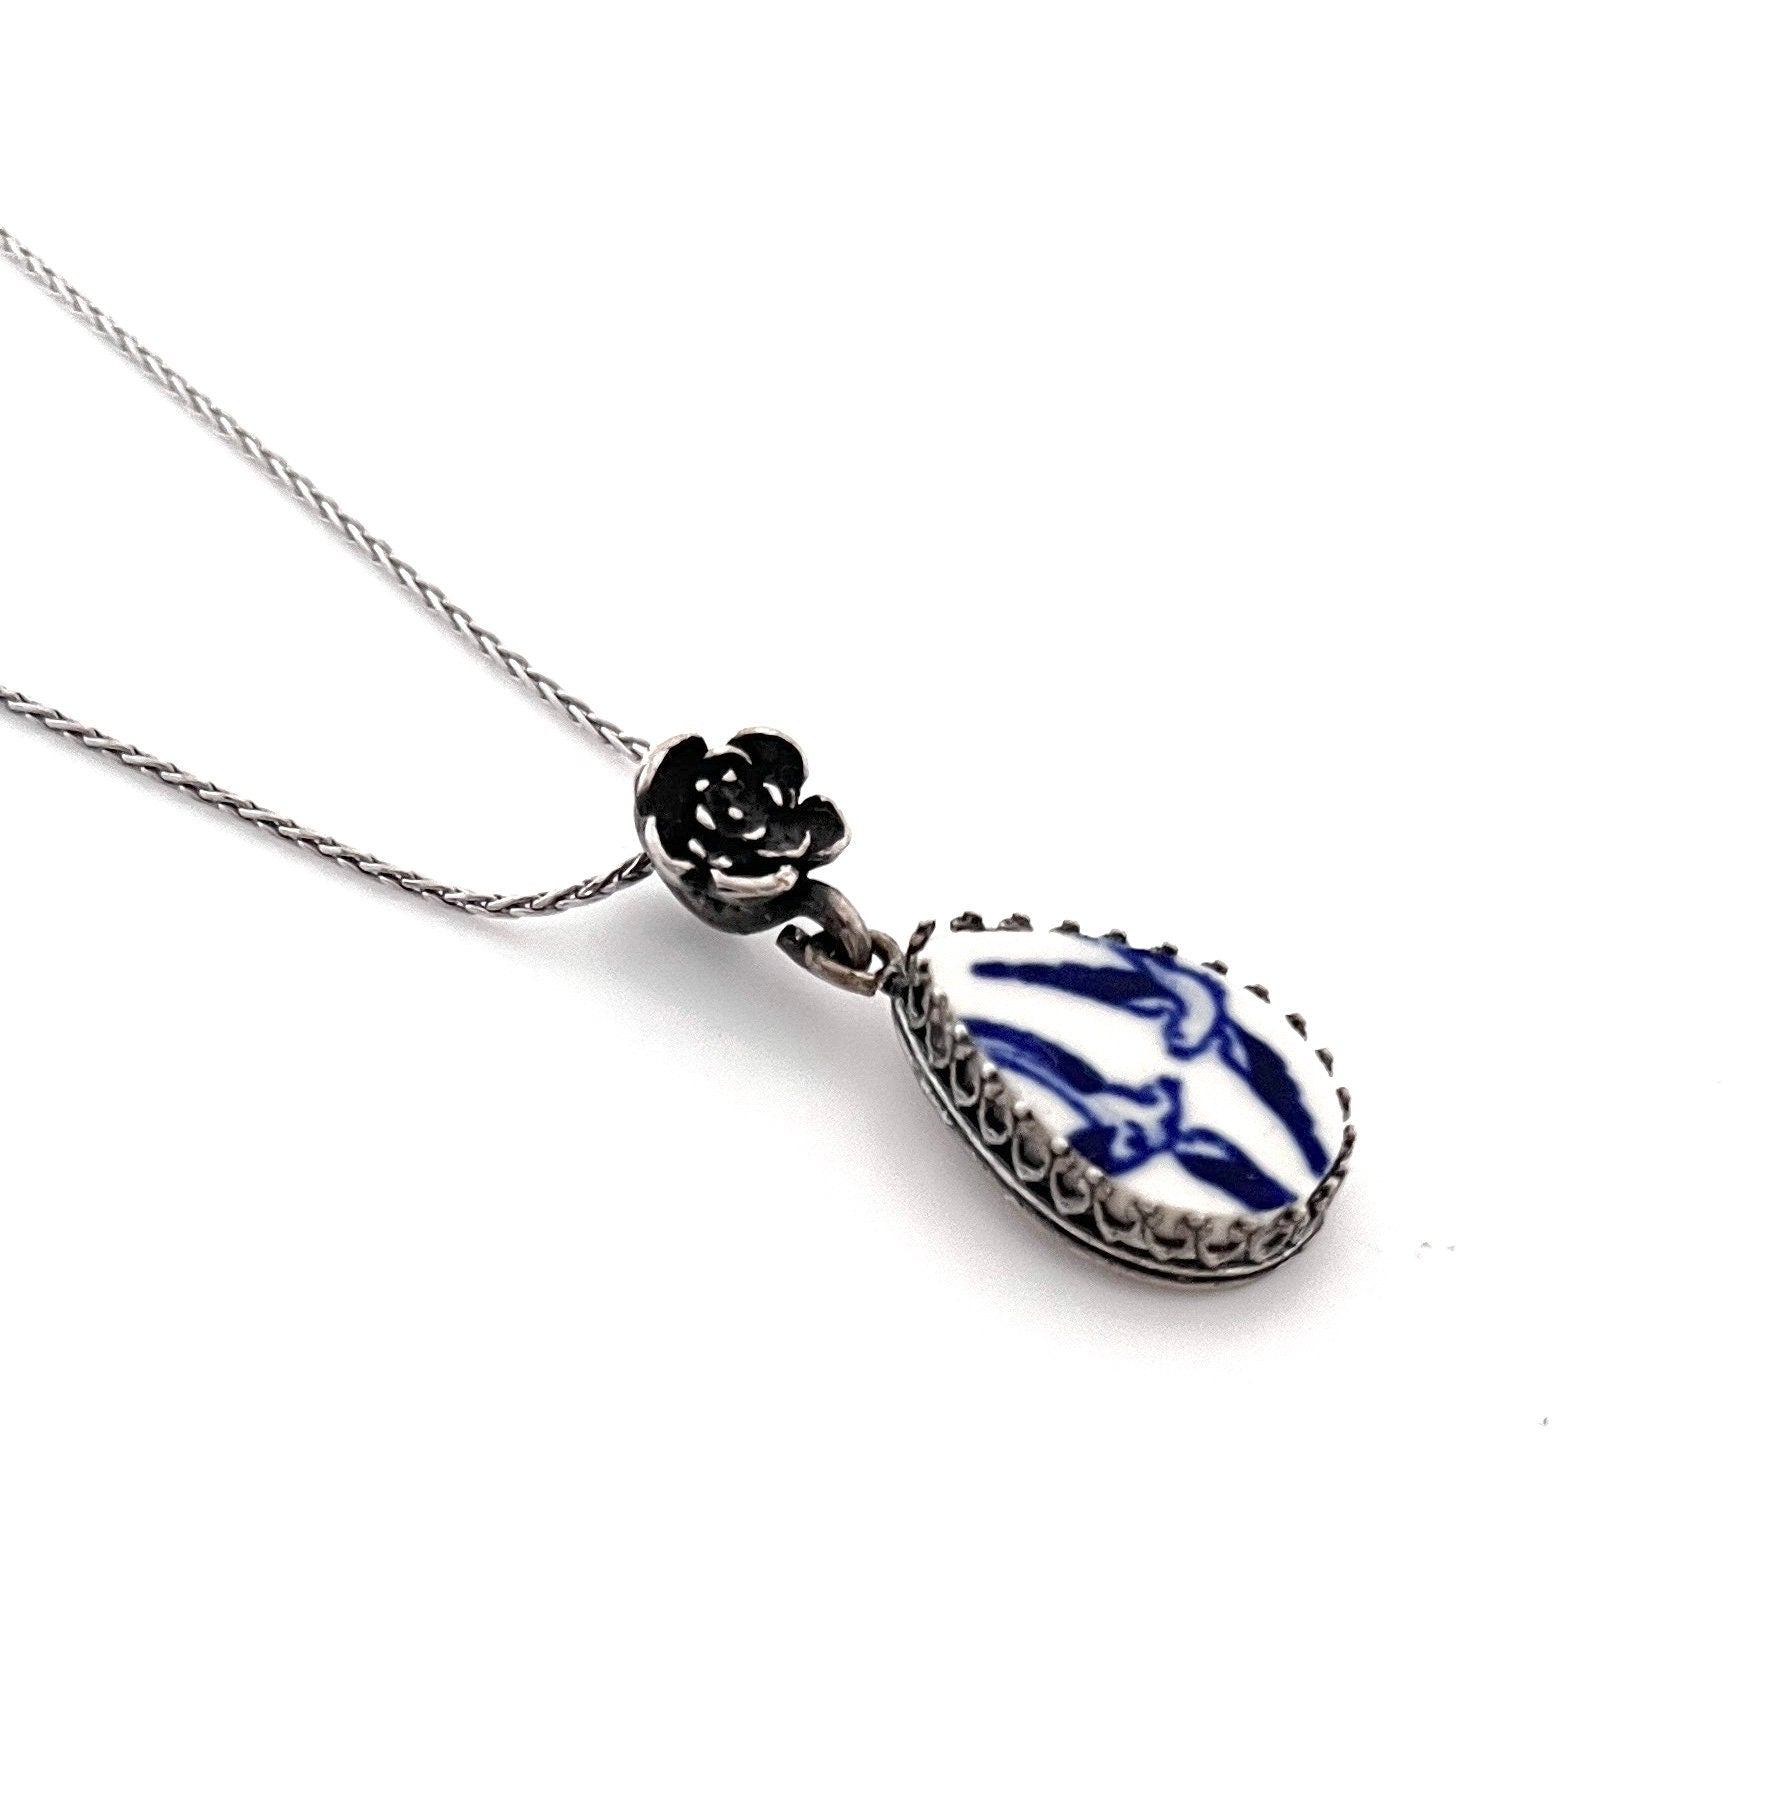 Adjustable Dainty Blue Willow Necklace, Love Birds Teardrop Pendant, 9th Anniversary Gift for Wife